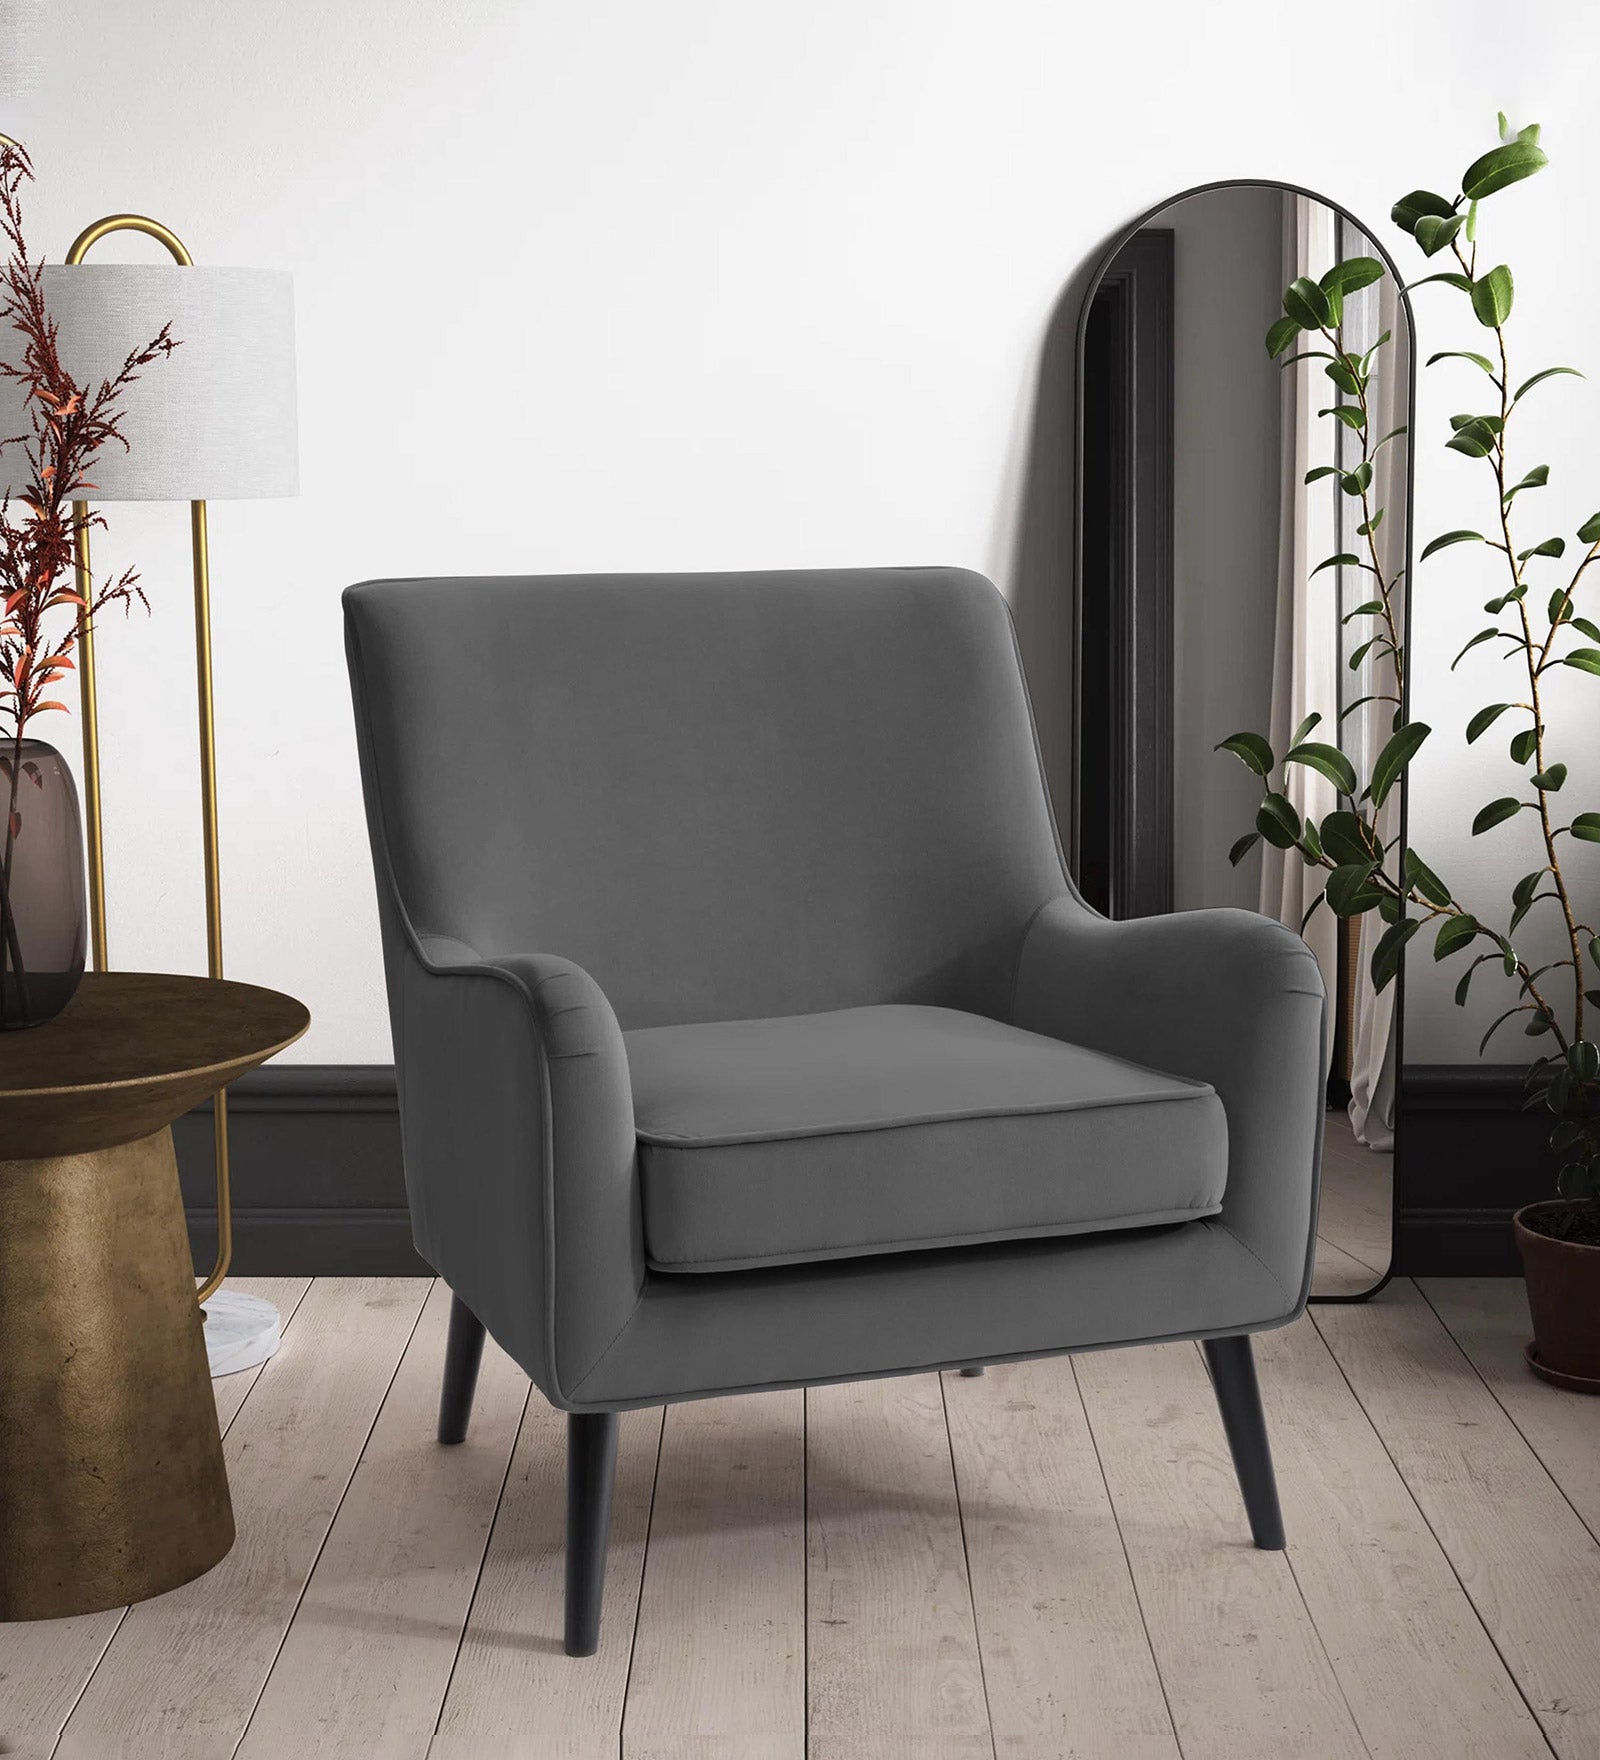 Ame Velvet Upholstered Wingback Chair in Davy grey Colour